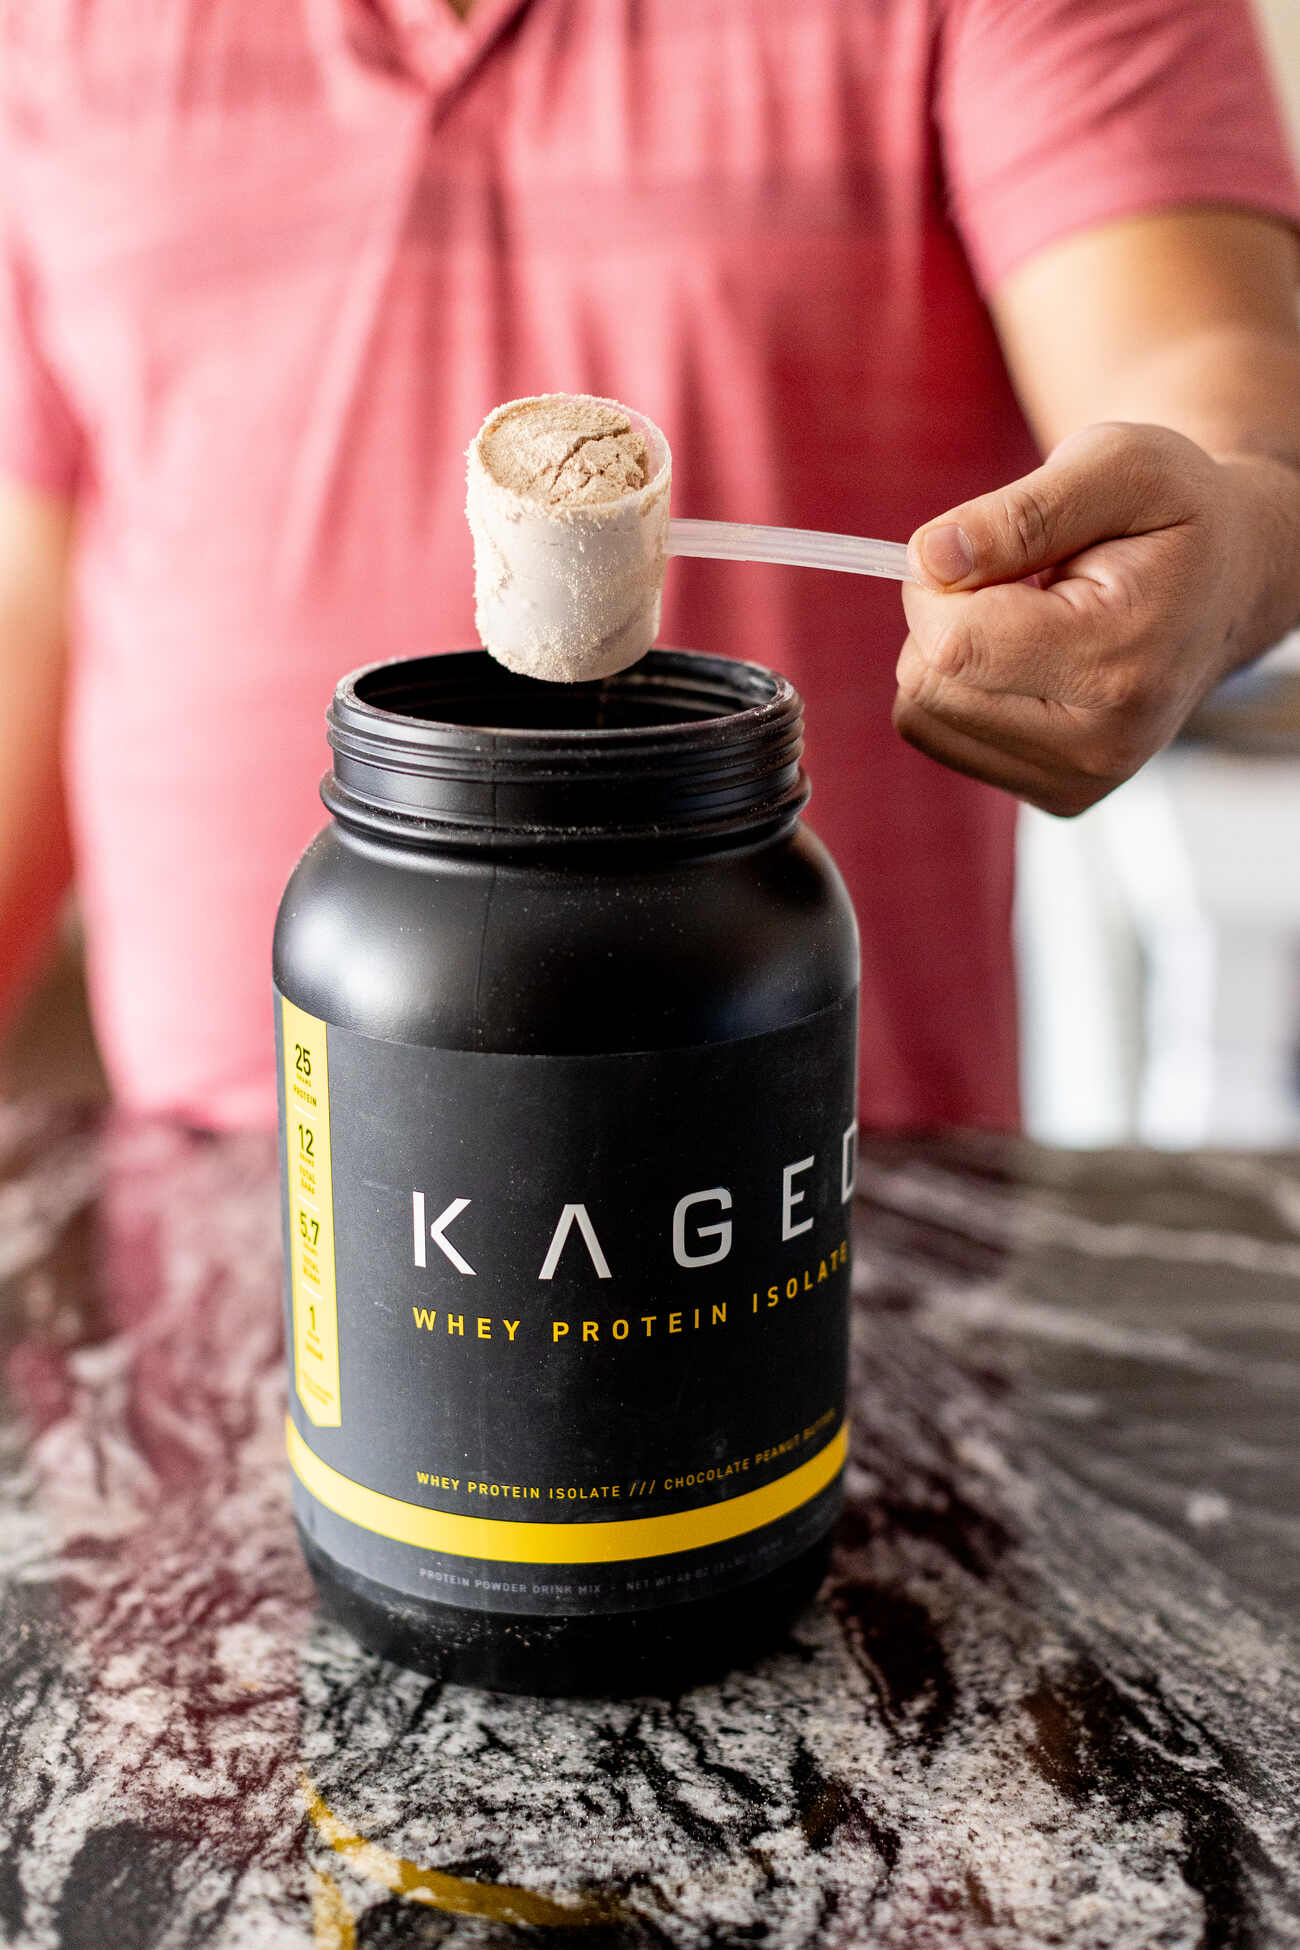 Man holding a scoop of Kaged whey protein powder on a black granite countertop